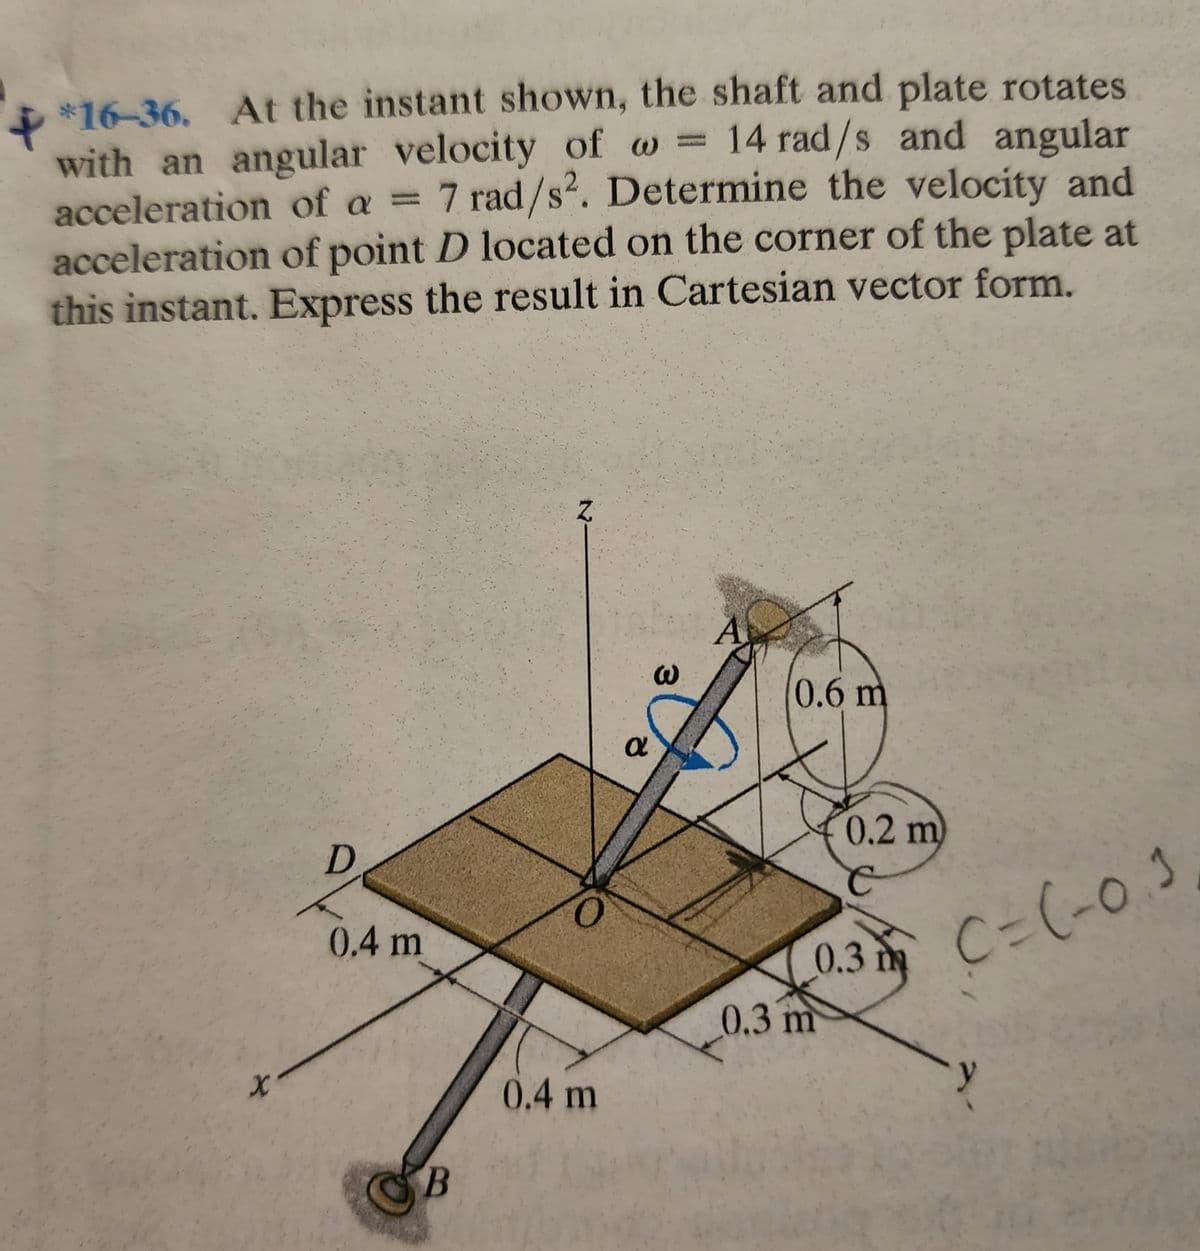 X
*16-36. At the instant shown, the shaft and plate rotates
with an angular velocity of w = 14 rad/s and angular
acceleration of a = 7 rad/s². Determine the velocity and
acceleration of point D located on the corner of the plate at
this instant. Express the result in Cartesian vector form.
X
D
0.4 m
B
Z.
0
0.4 m
α
3
A
0.6 m
0.2 m)
C
0.3 C-(-0.3
m
0.3 m
-y